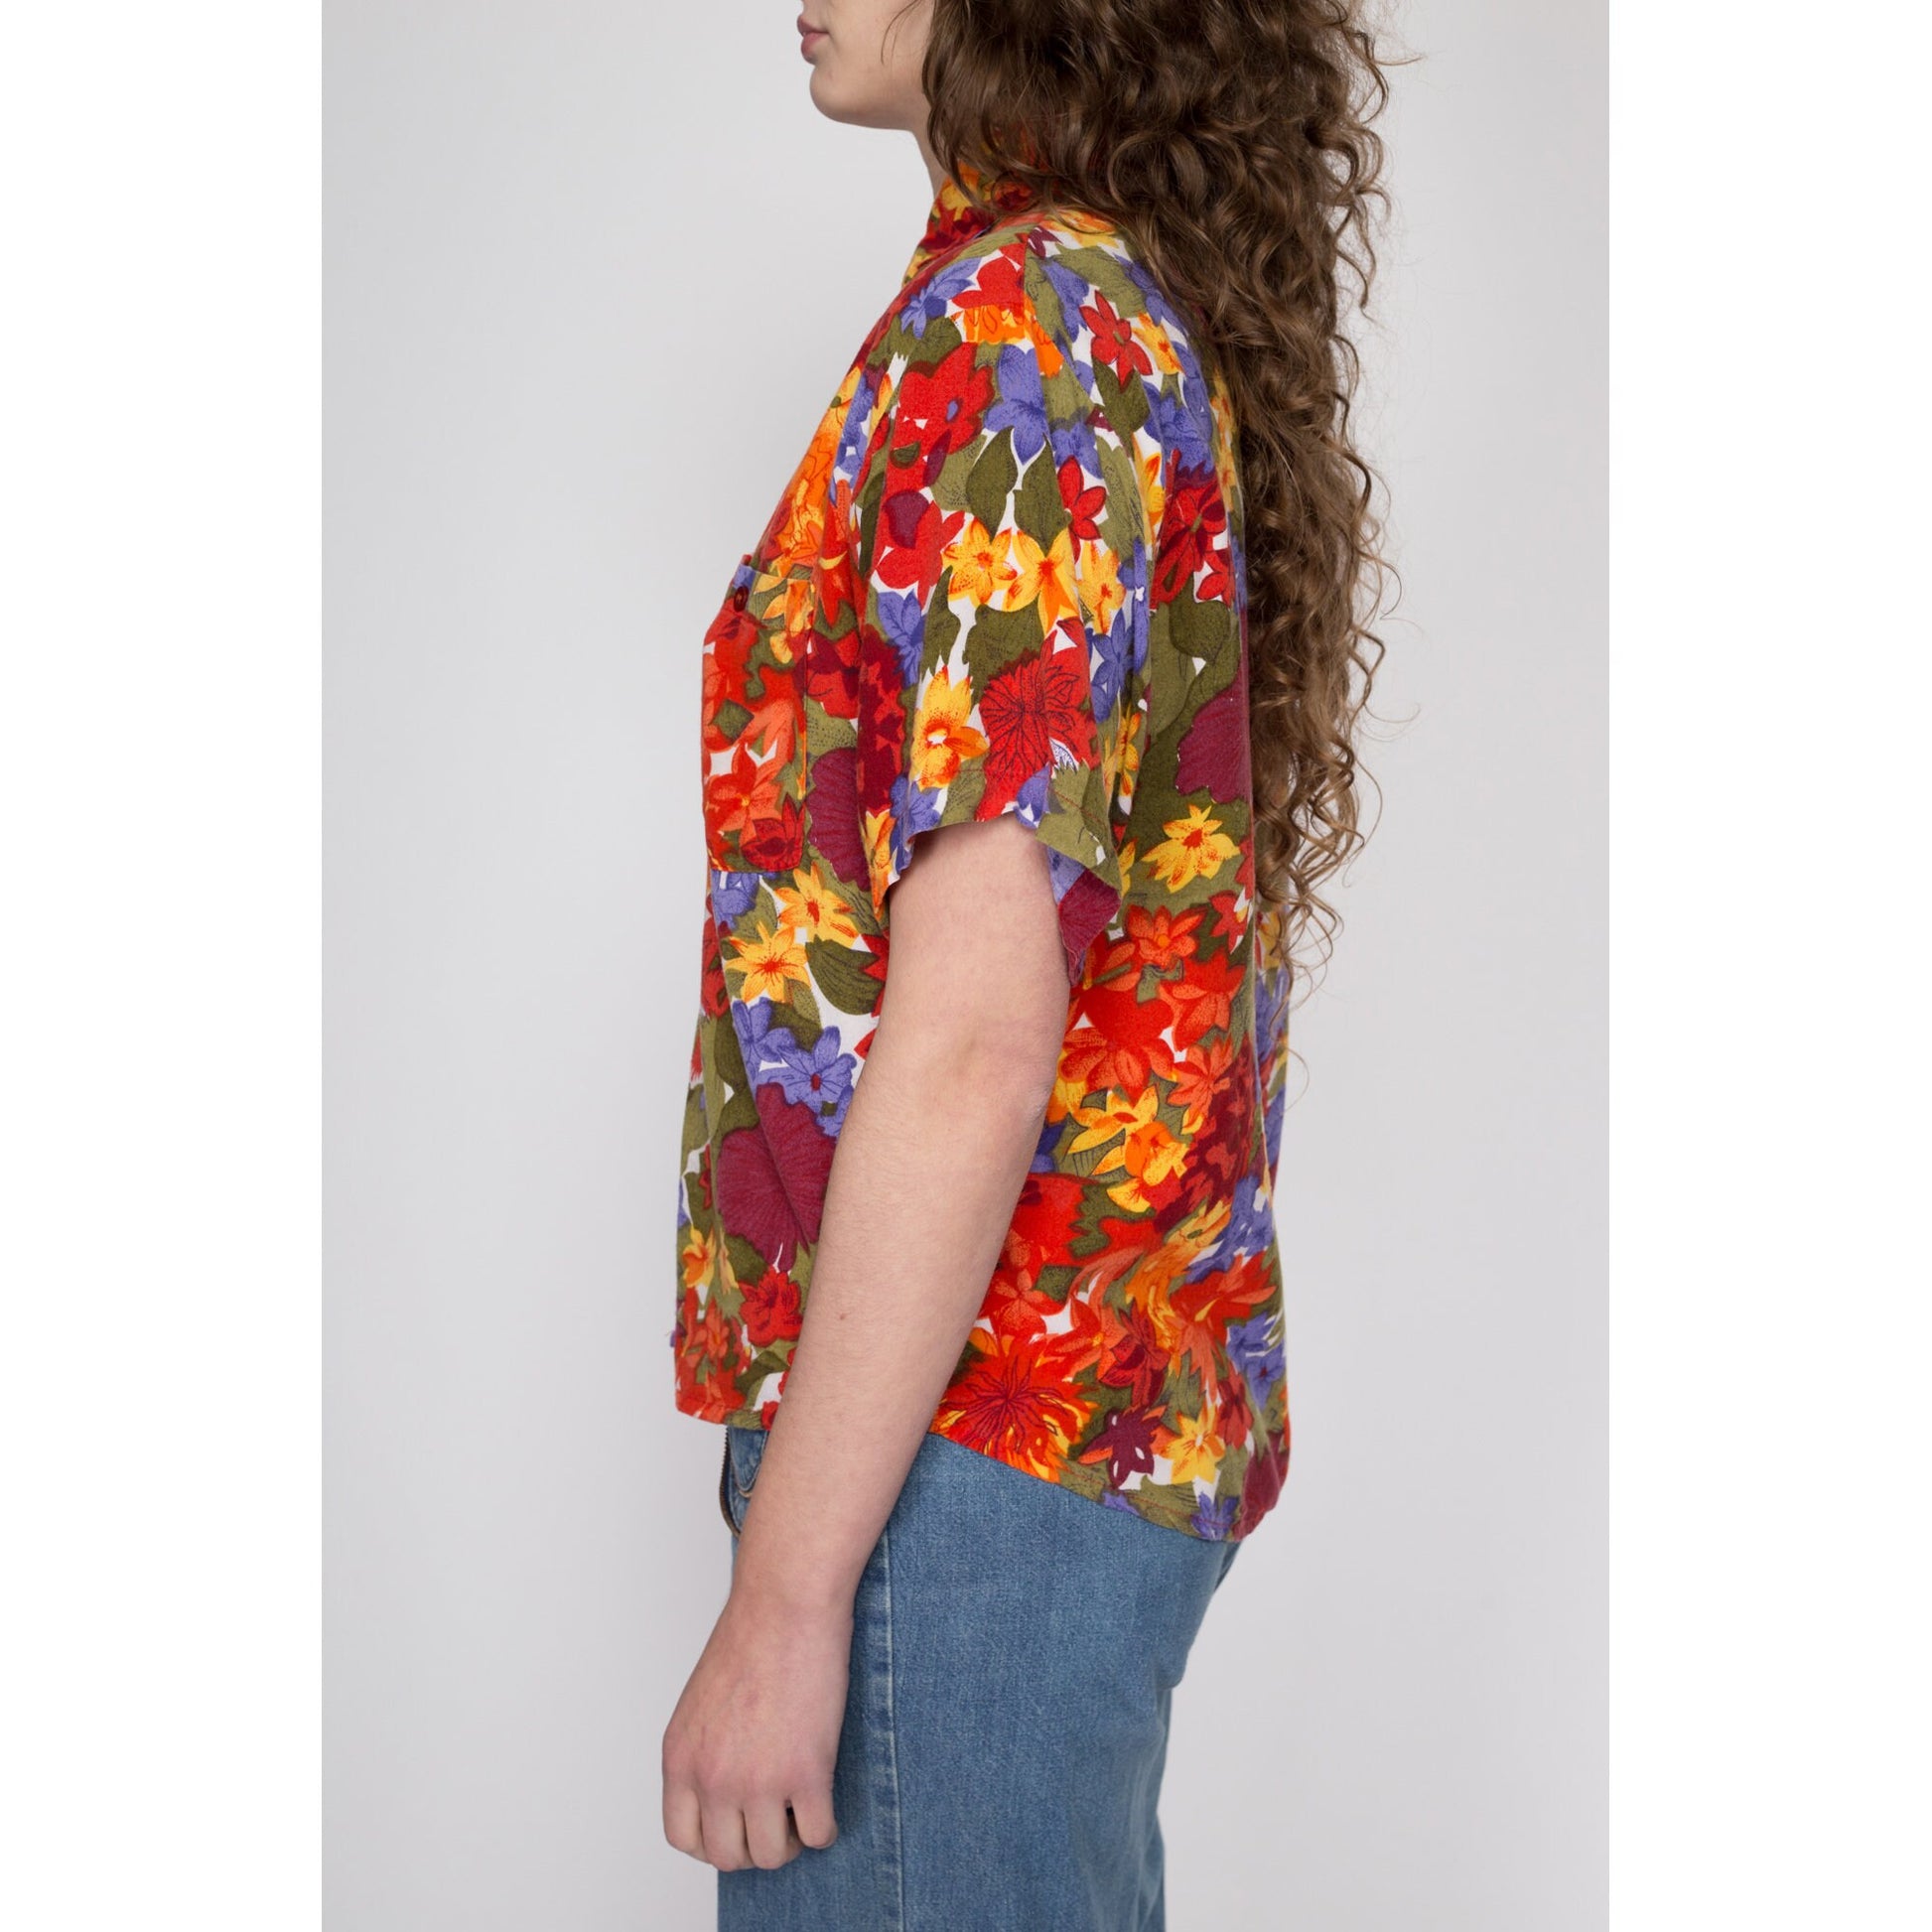 Small 80s 90s Orange Watercolor Floral Button Up Shirt | Vintage Boho Oversized Collared Rayon Blouse